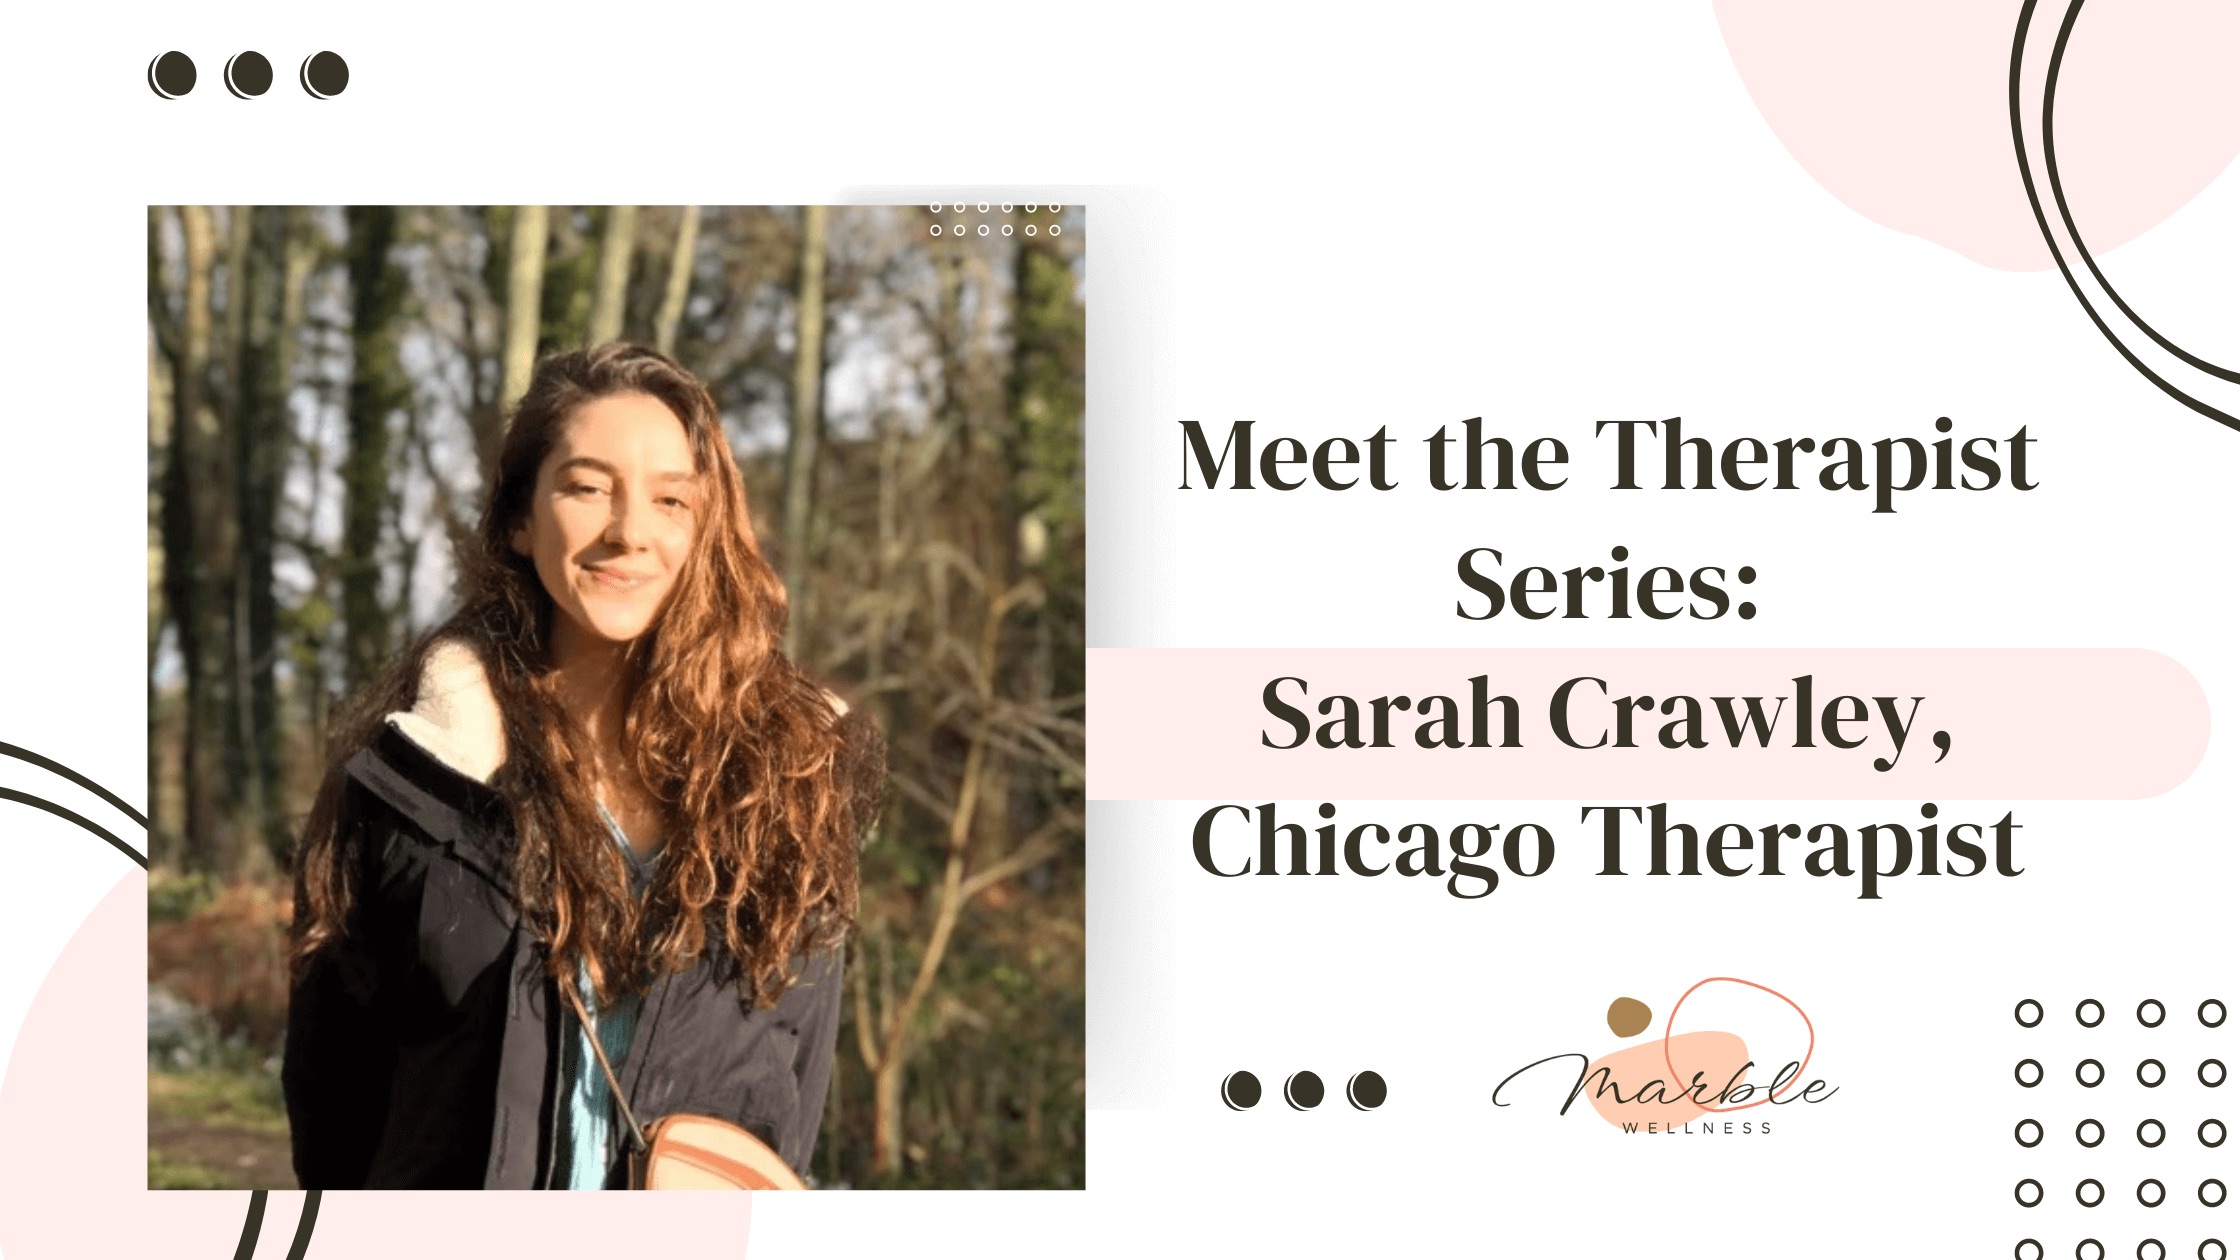 Cover photo for blog "Meet the Therapist Series: Sarah Crawley, Chicago Therapist" at Marble Wellness, a therapy practice in Chicago's West Loop for professionals, working moms, young adults, and more.